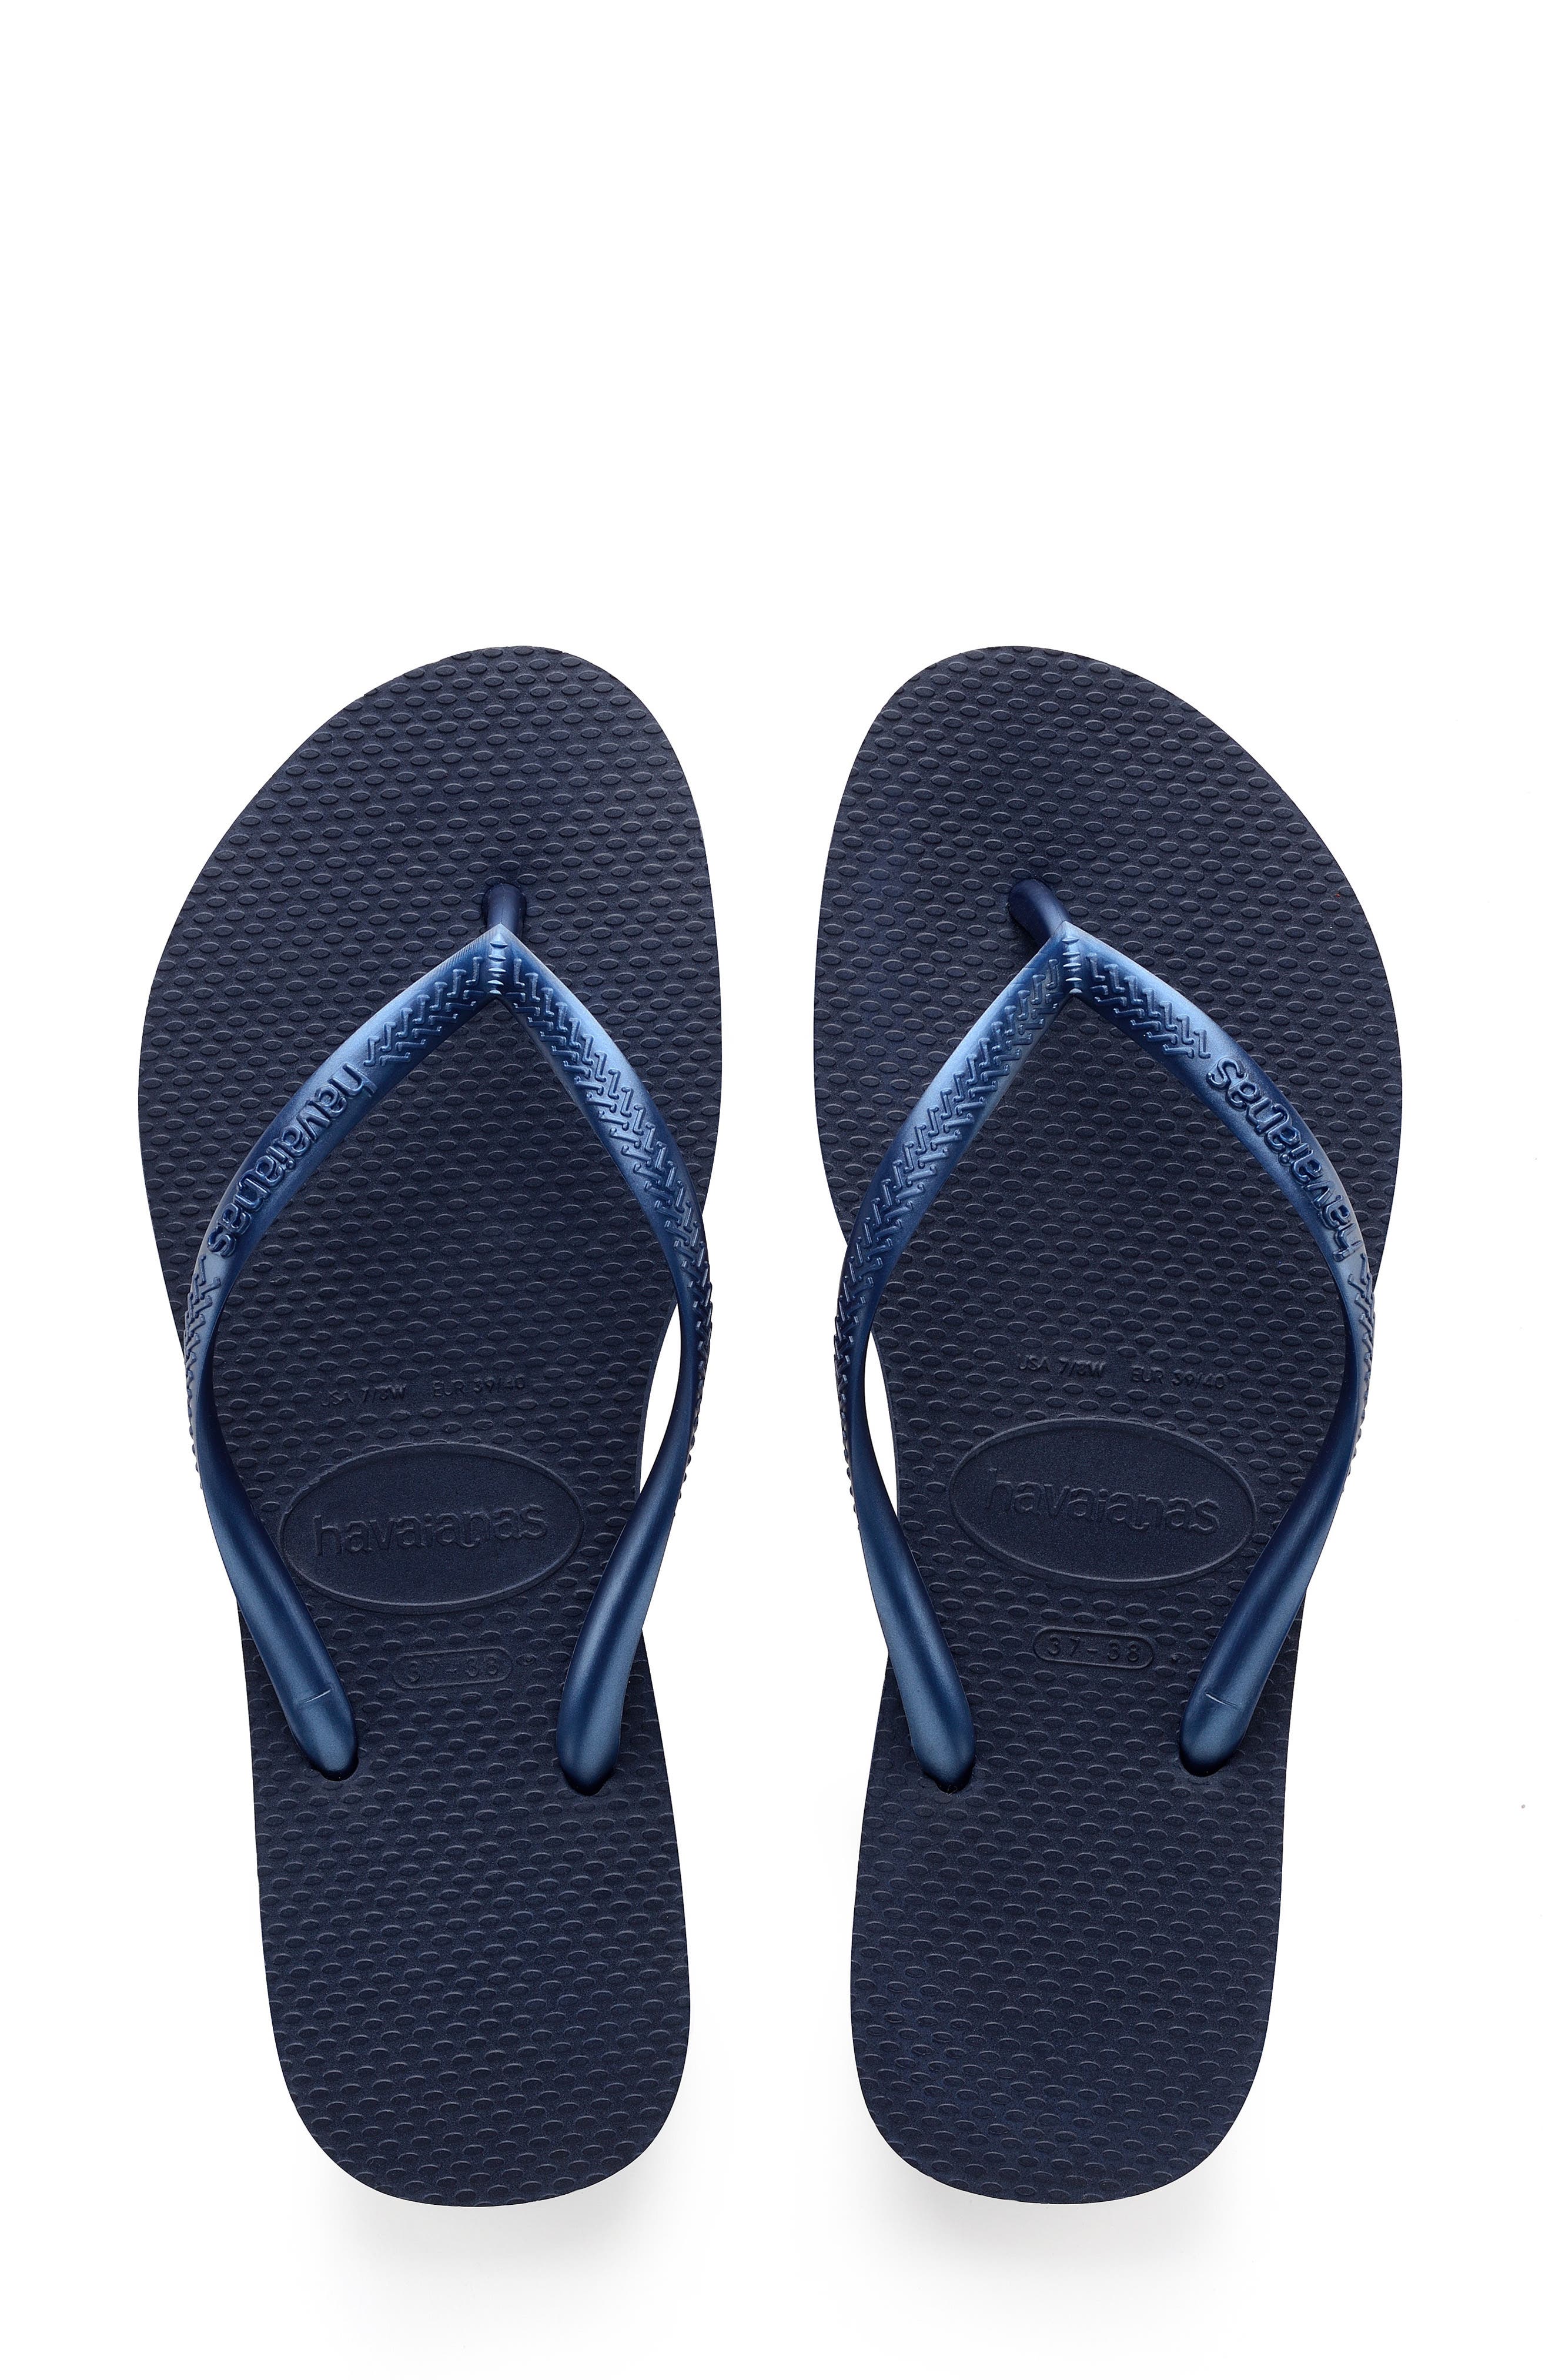 adidas Adilette Lite Sandals in Pale Blue Blue Womens Shoes Flats and flat shoes Sandals and flip-flops 